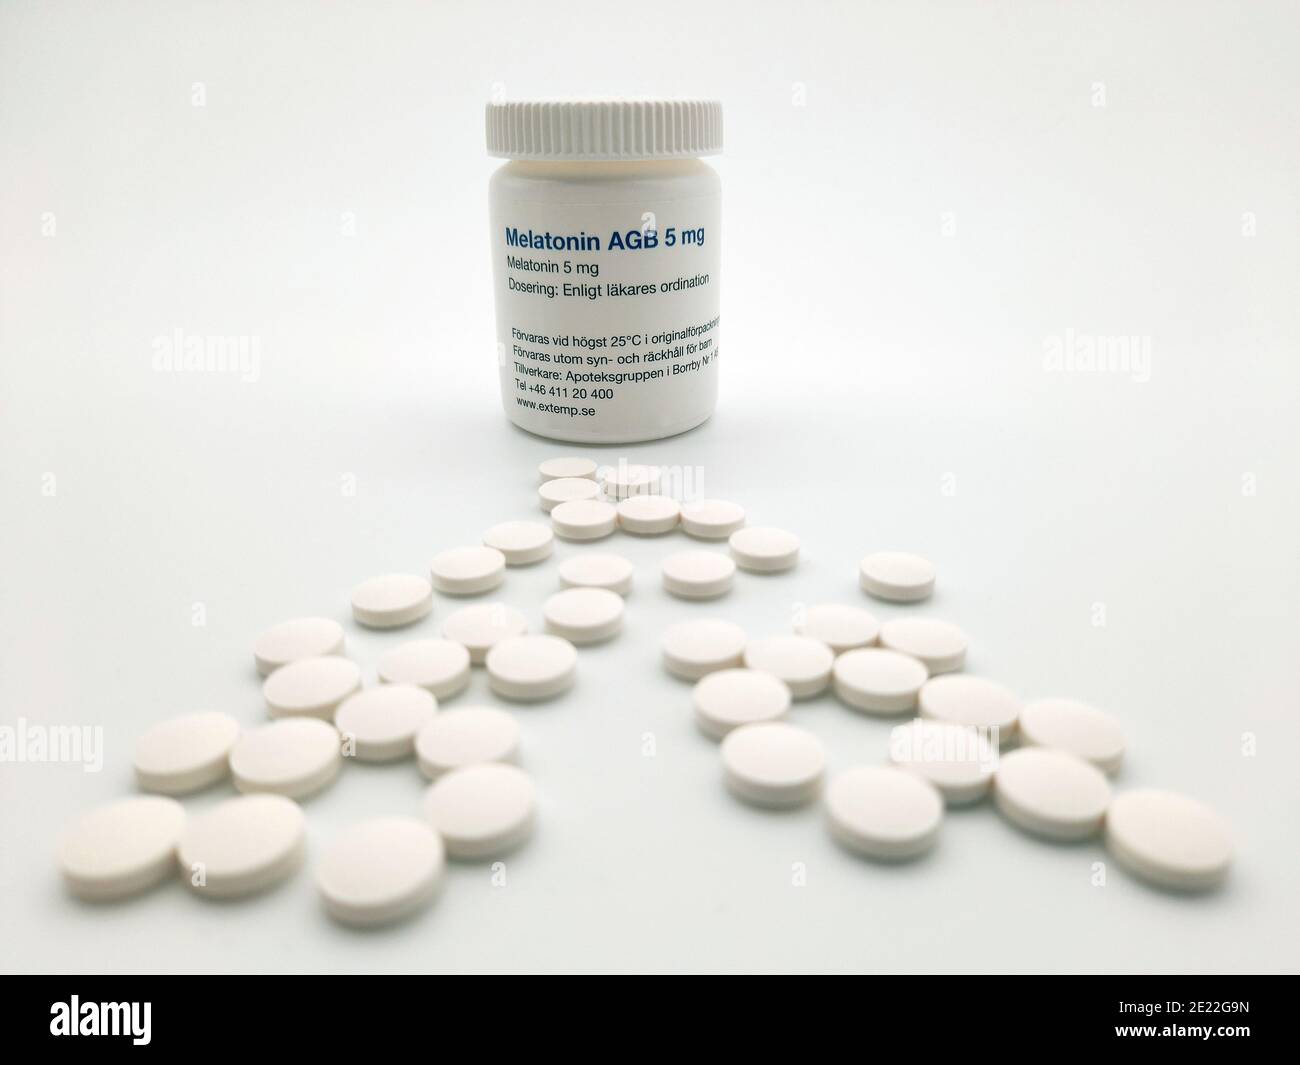 Stockholm, Sweden - January 10, 2021: A pill jar of Melatonin and the pills placed in front of the jar. Used perhaps to illustrate the increased presc Stock Photo